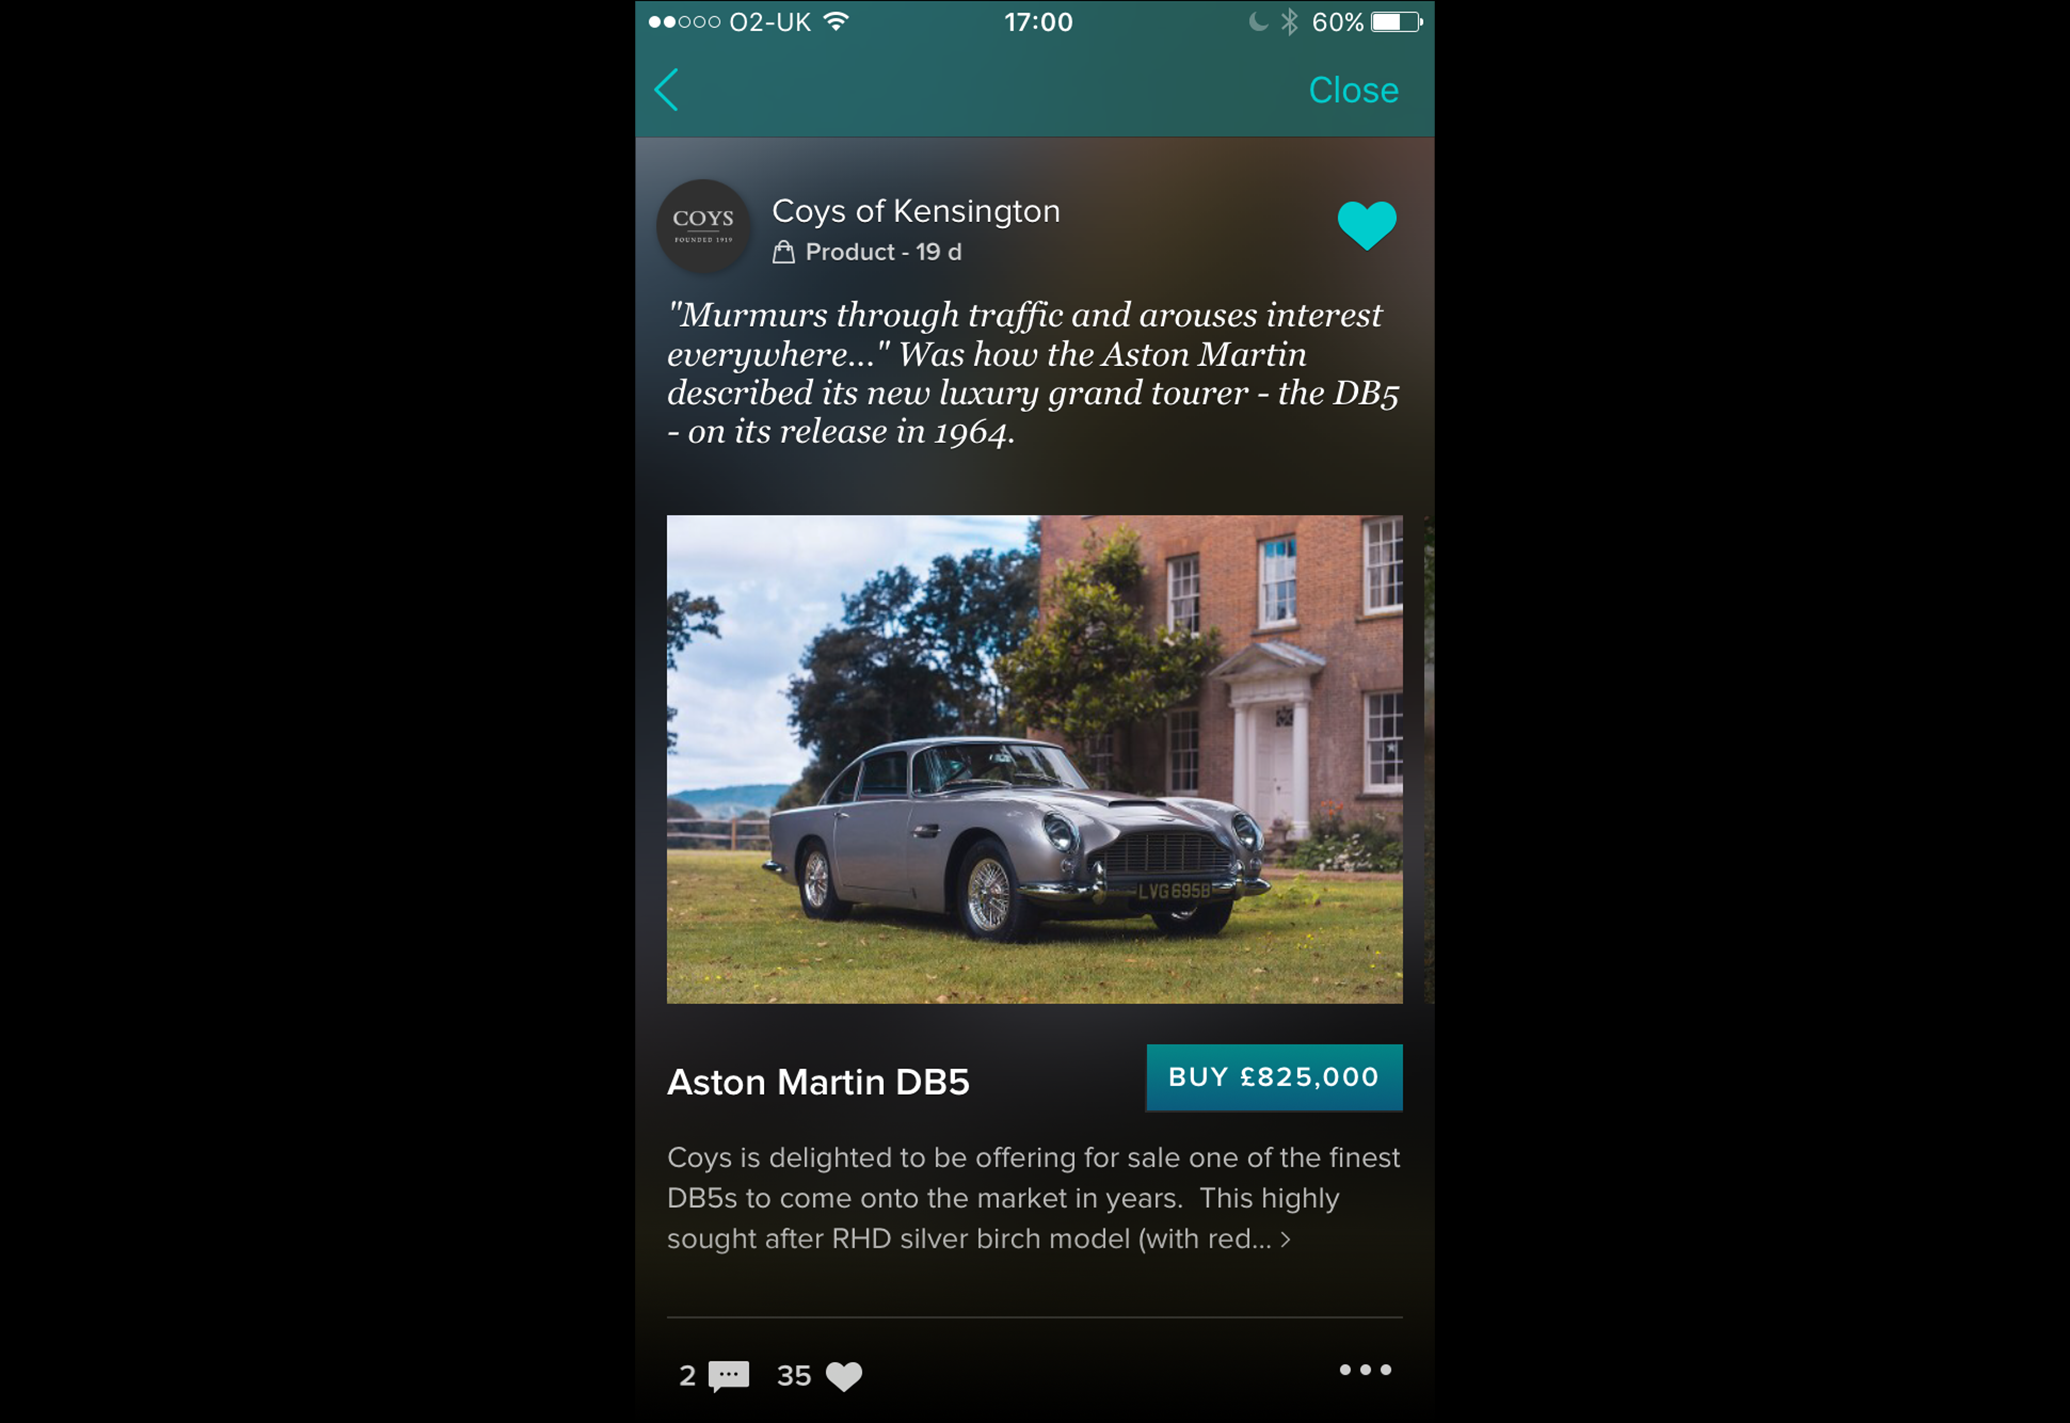 1964 Aston Martin DB5 sold by Coys for ?825,000 on Vero with Apple Pay_IN-APP.PNG